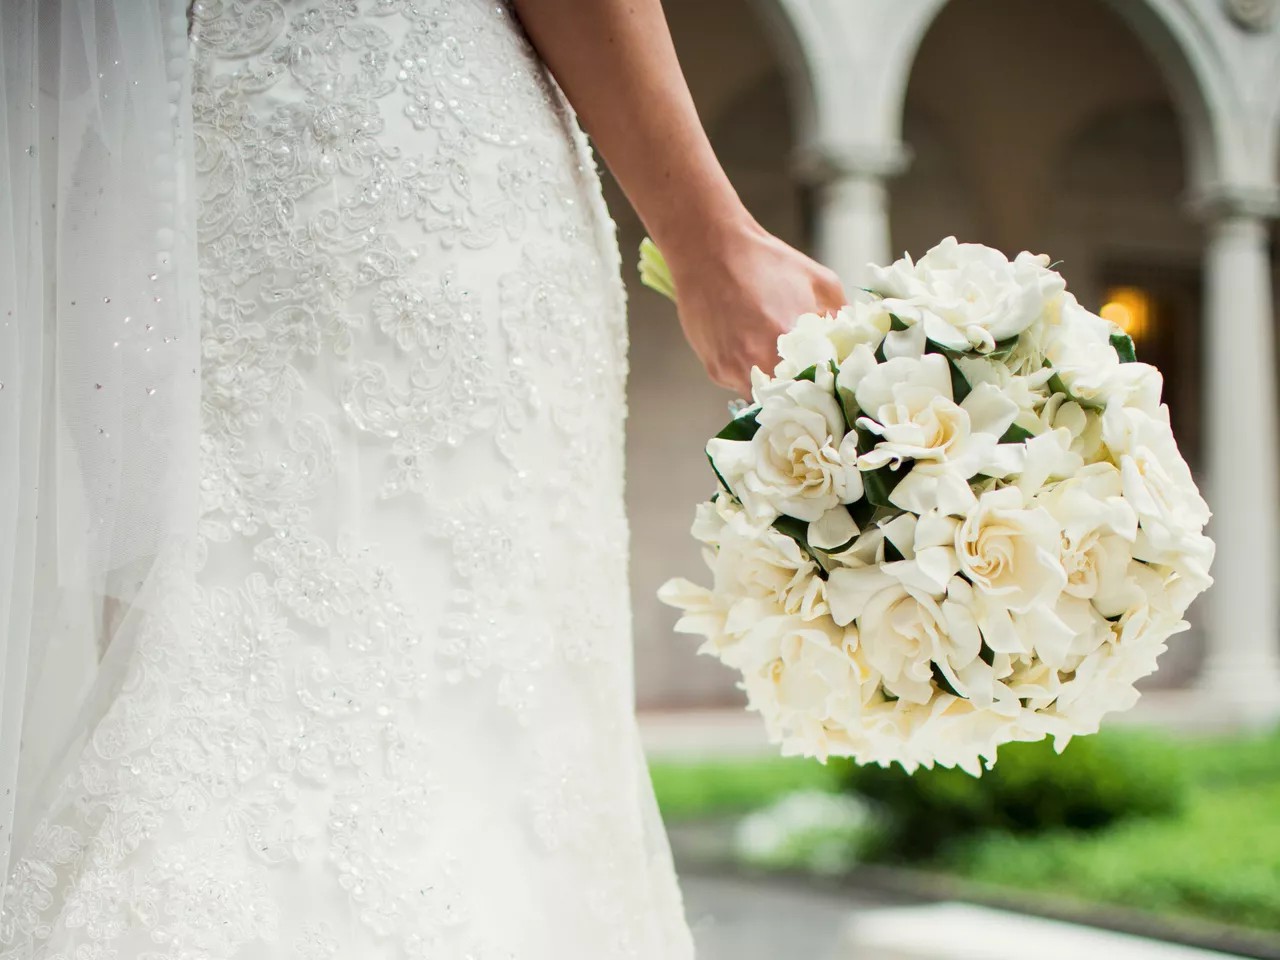 What Do Your Wedding Flowers Represents: The Most Beautiful Wedding Flowers And The Significance Of Wedding Flowers